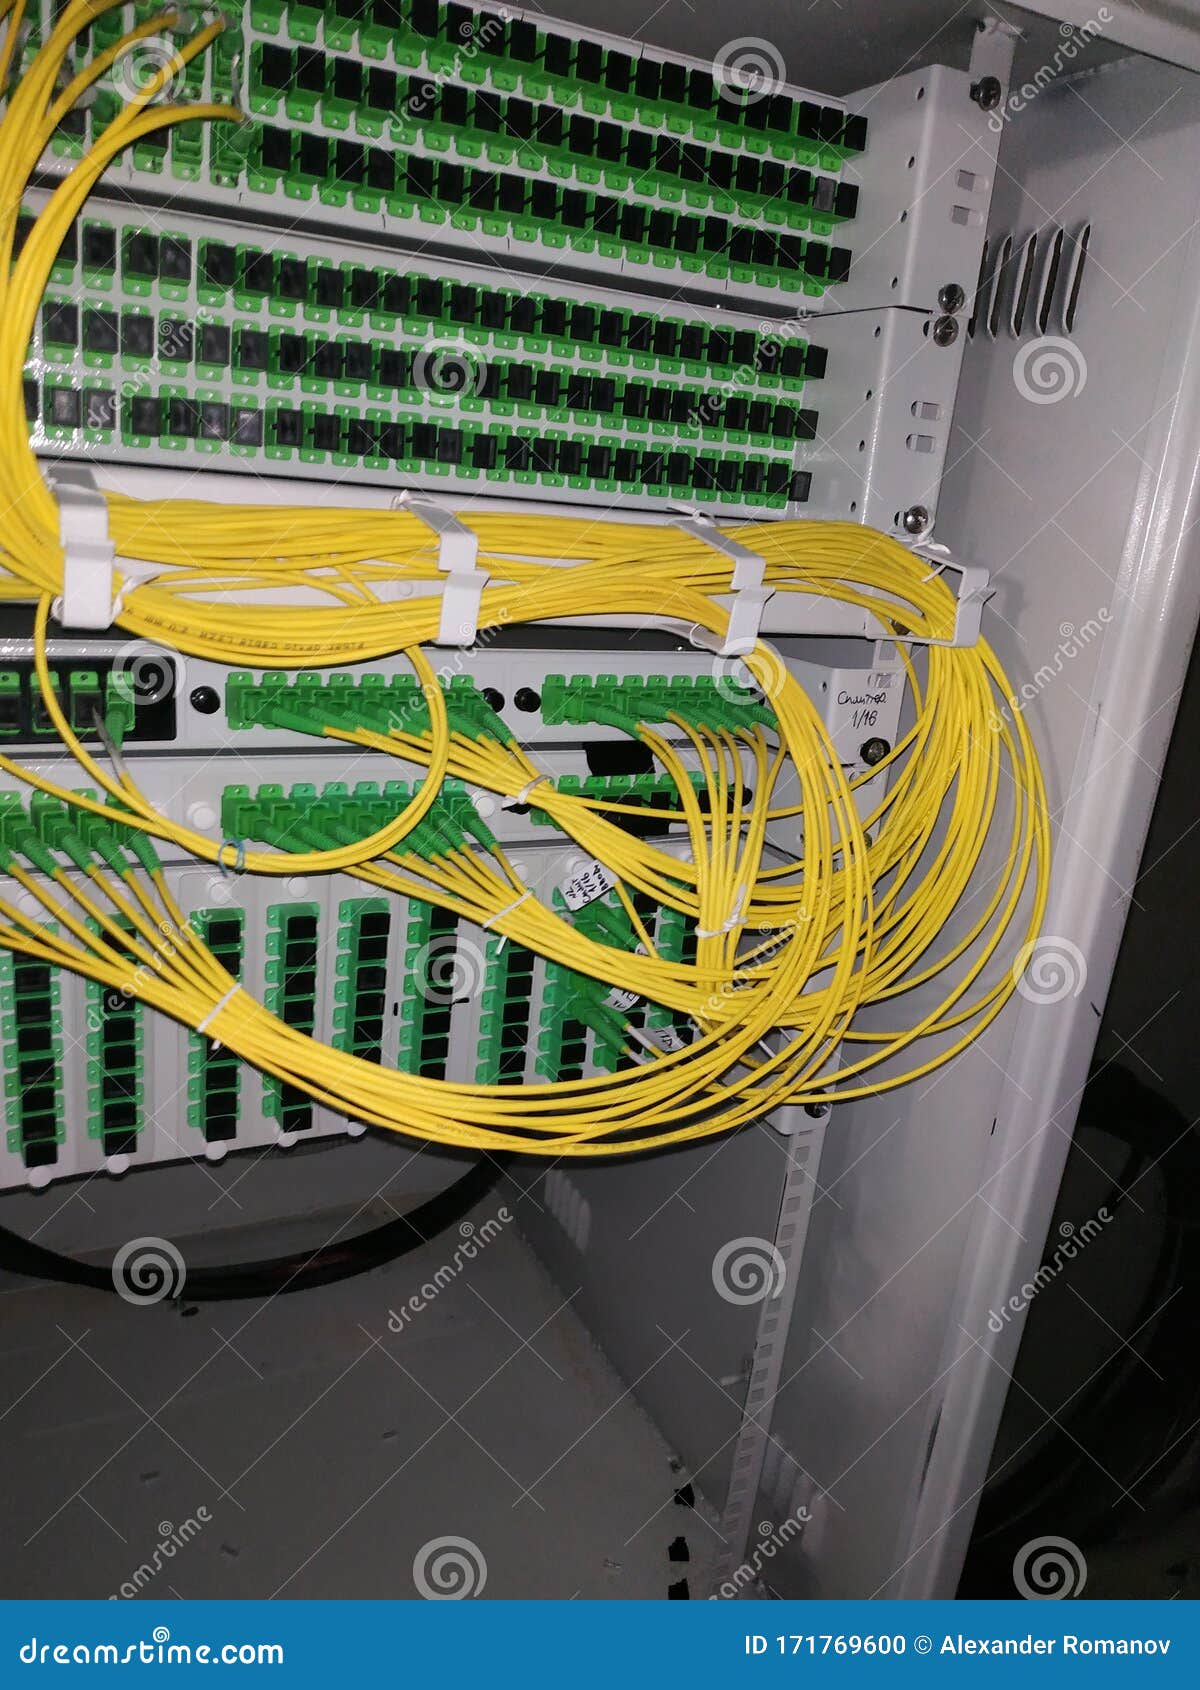 optical cross with upc patchcords